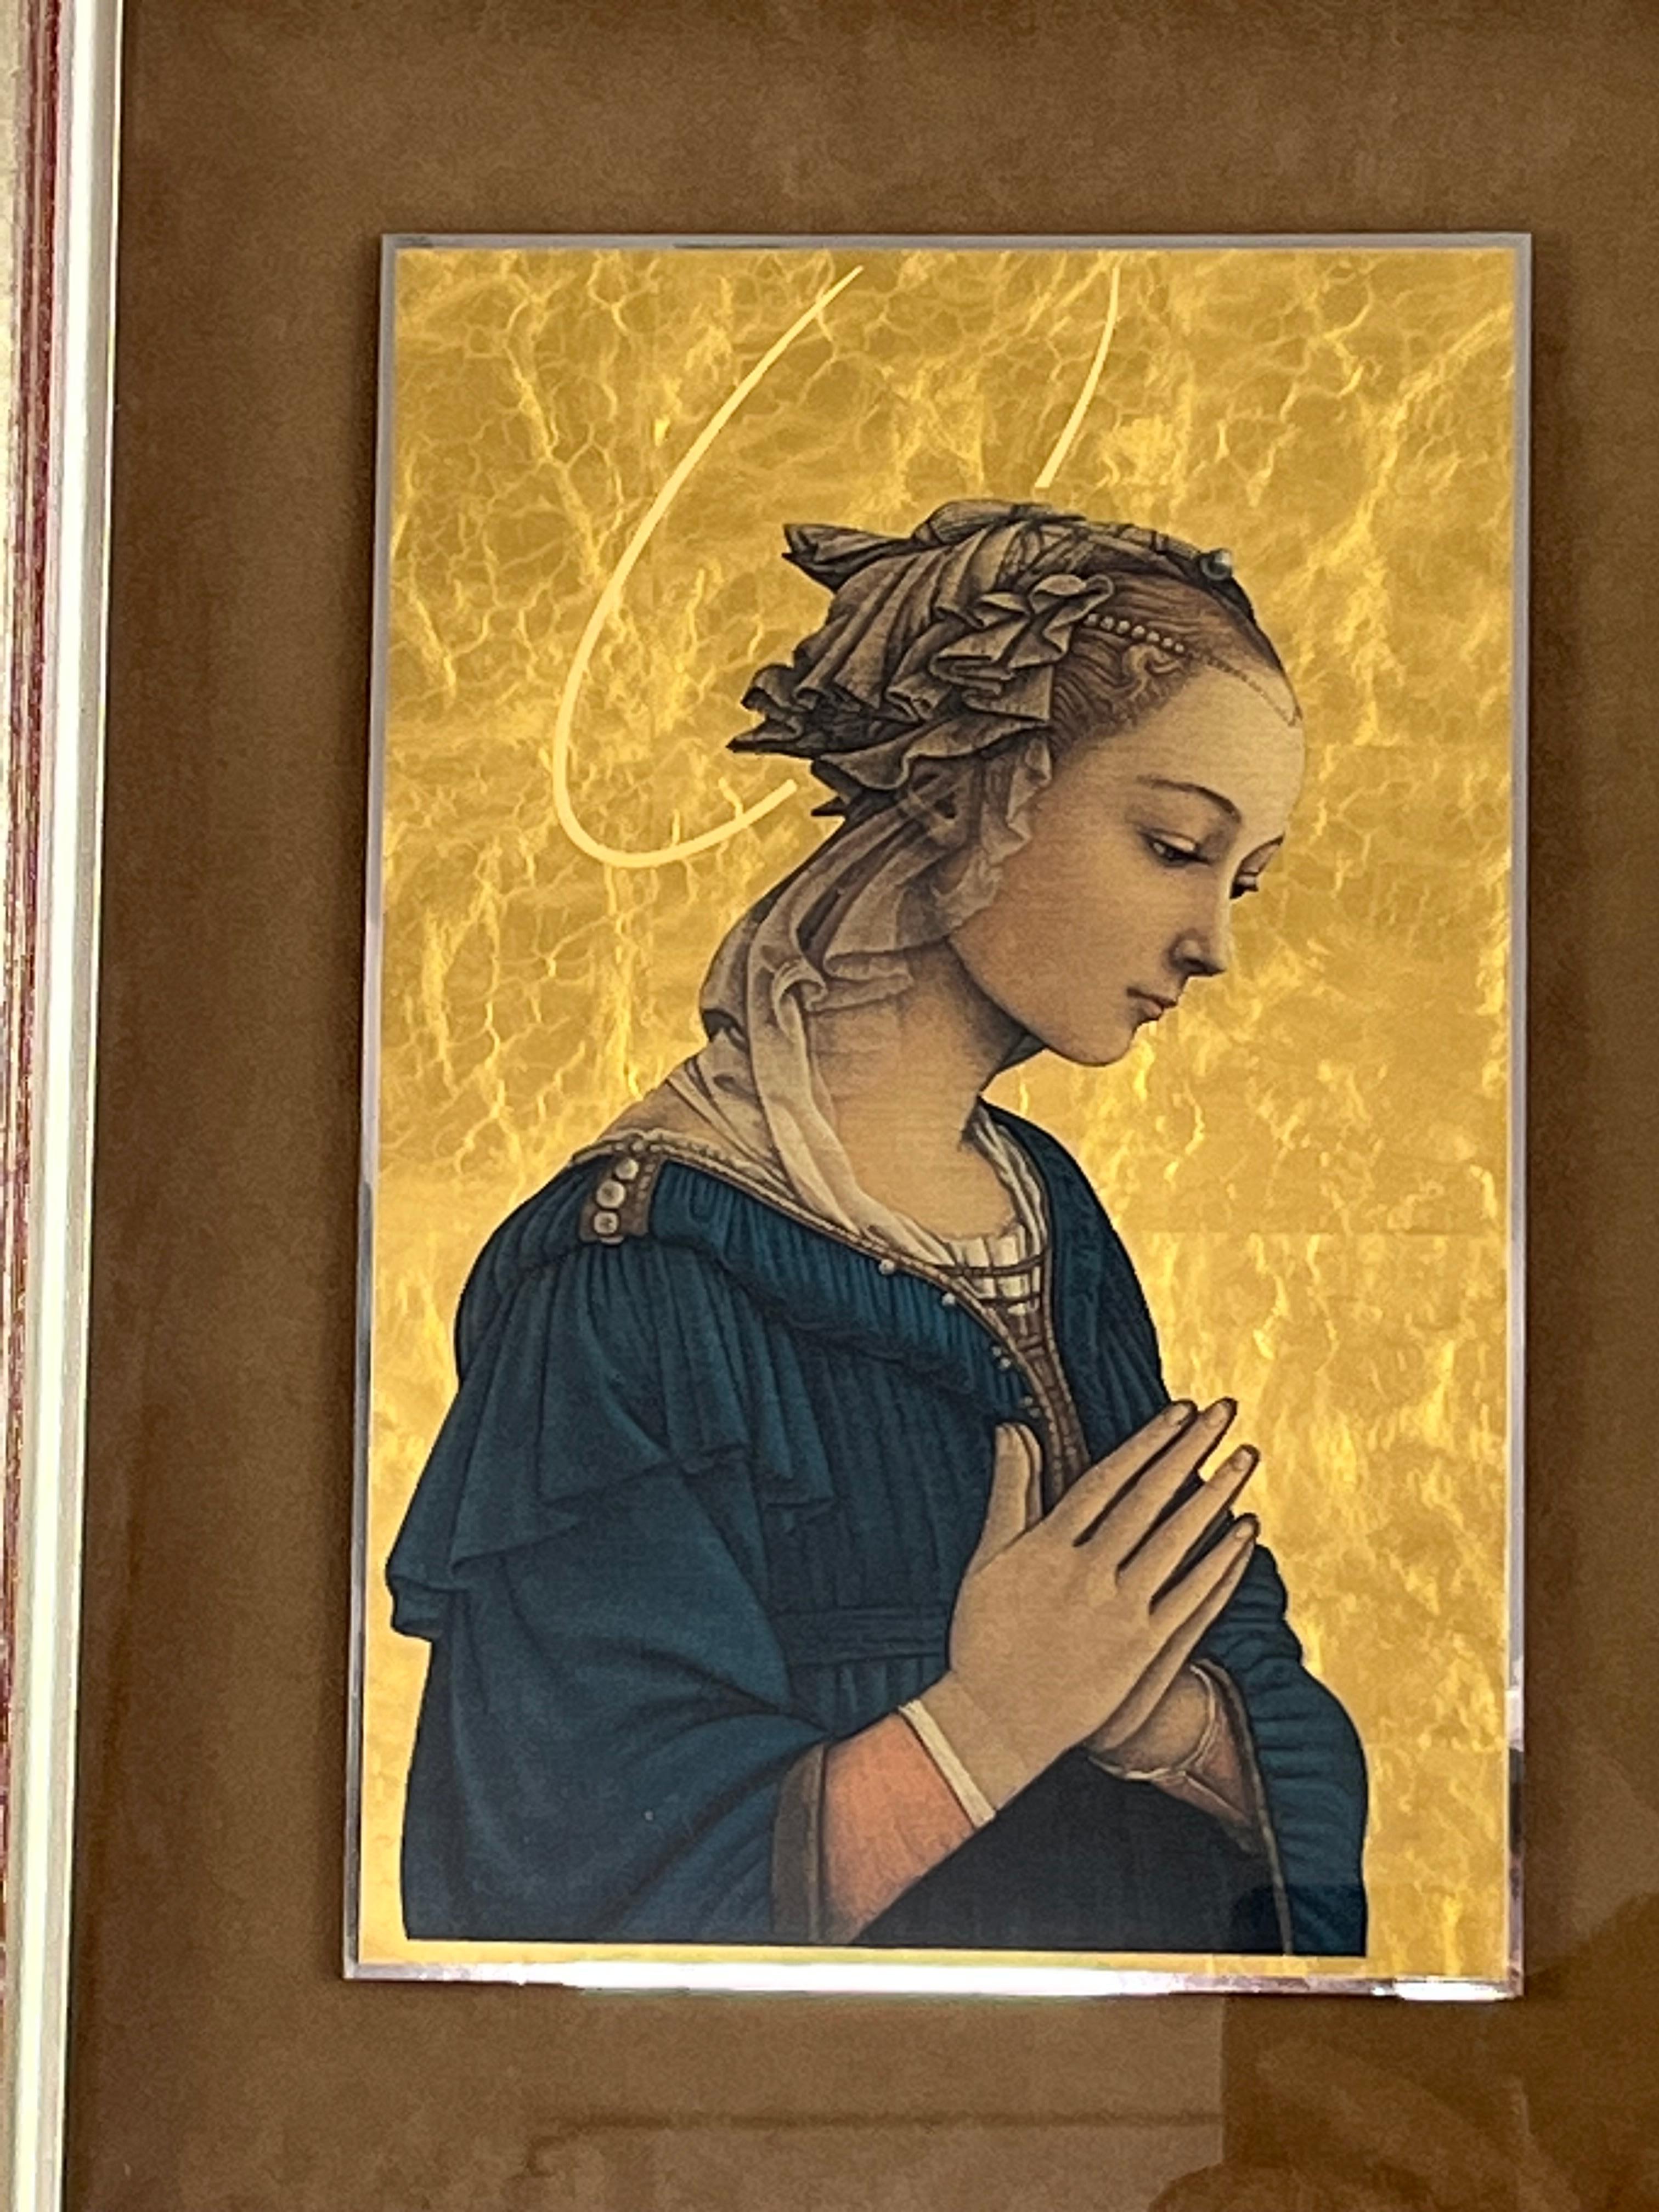 Bedside depicting the Madonna, bas-relief on a 925 thousandth silver plate (the most valuable), made with artisanal procedures. Italy, 1990. Wooden frame.